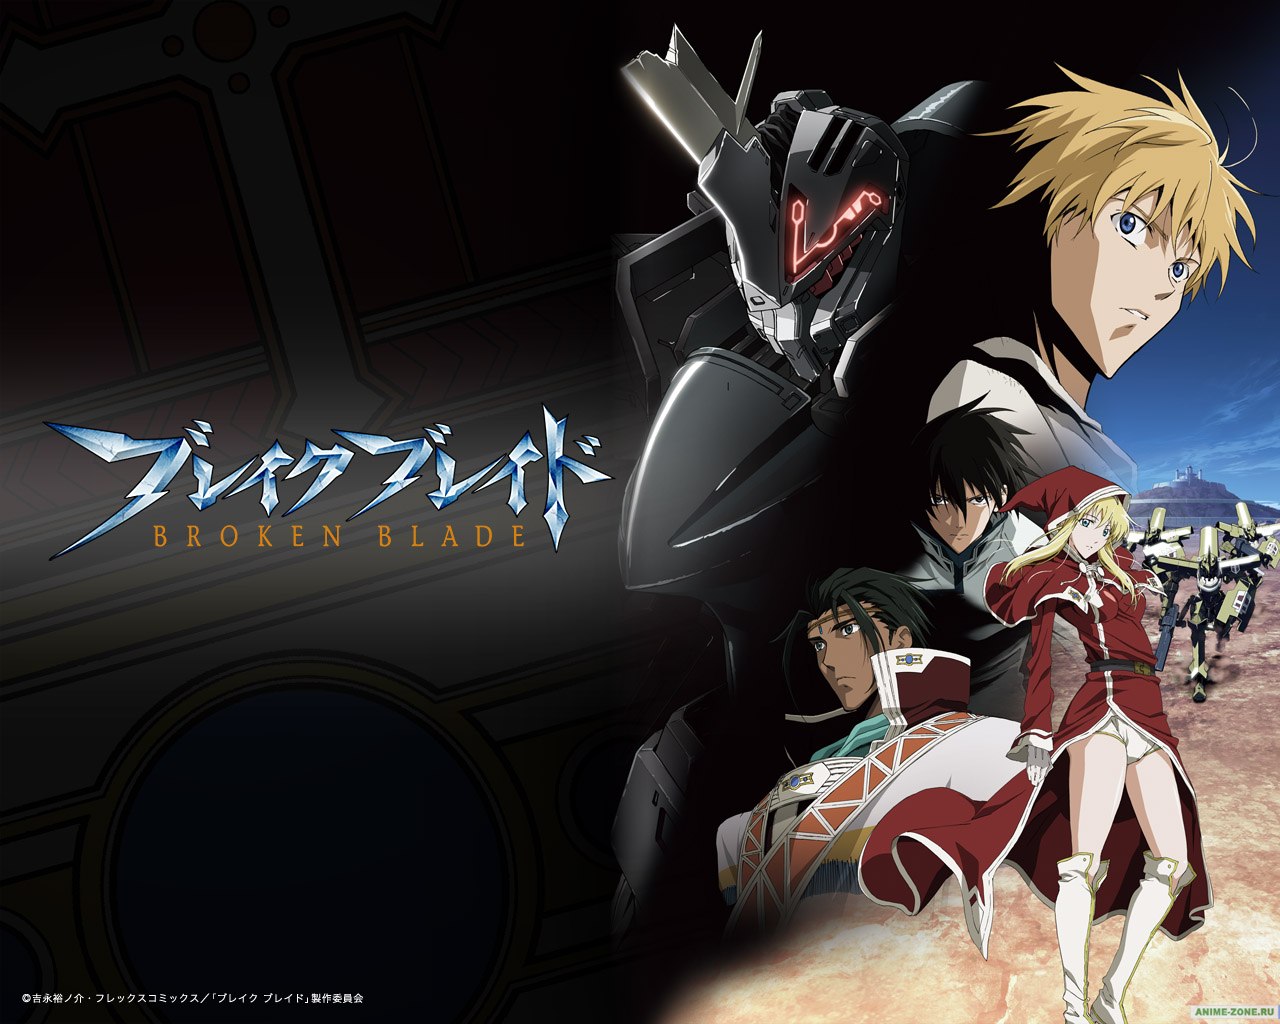 Download this Broken Blade Anime Totally Awesome Action picture